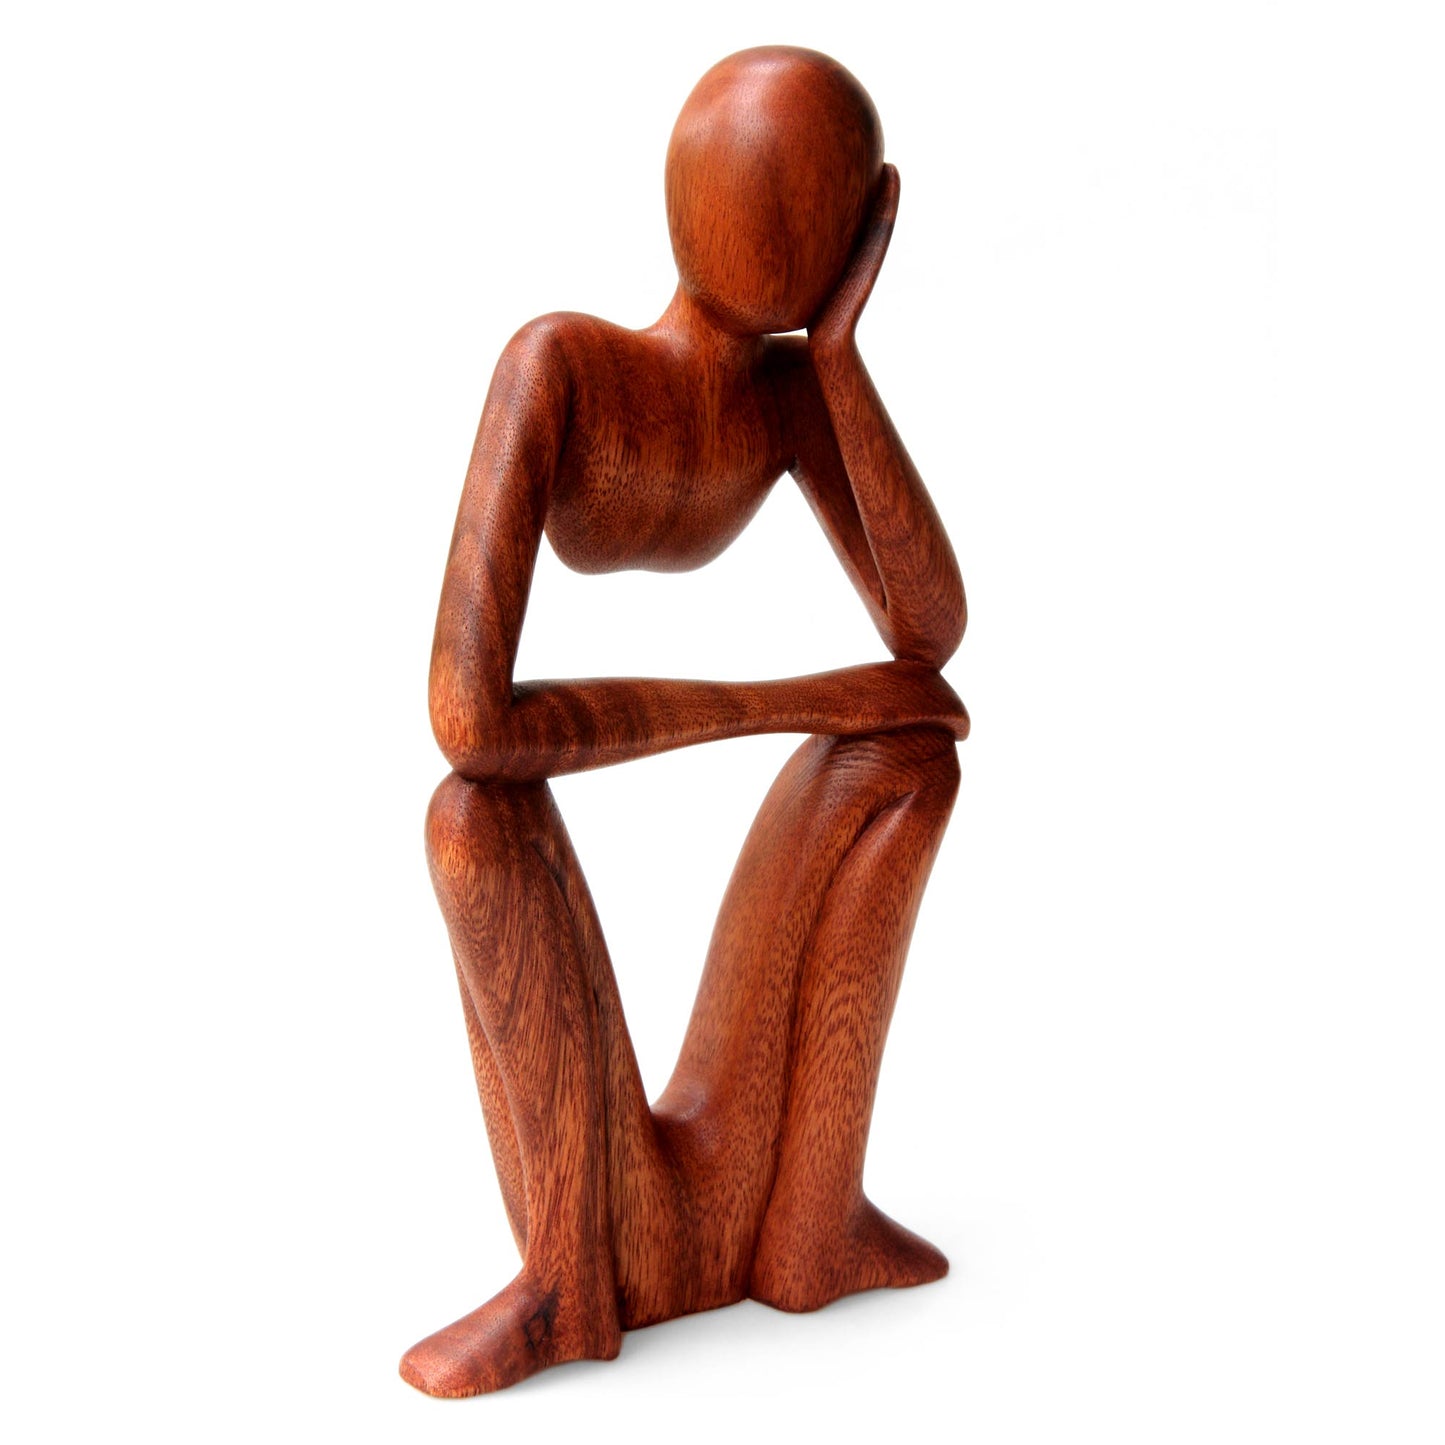 Thinking of You Wood sculpture